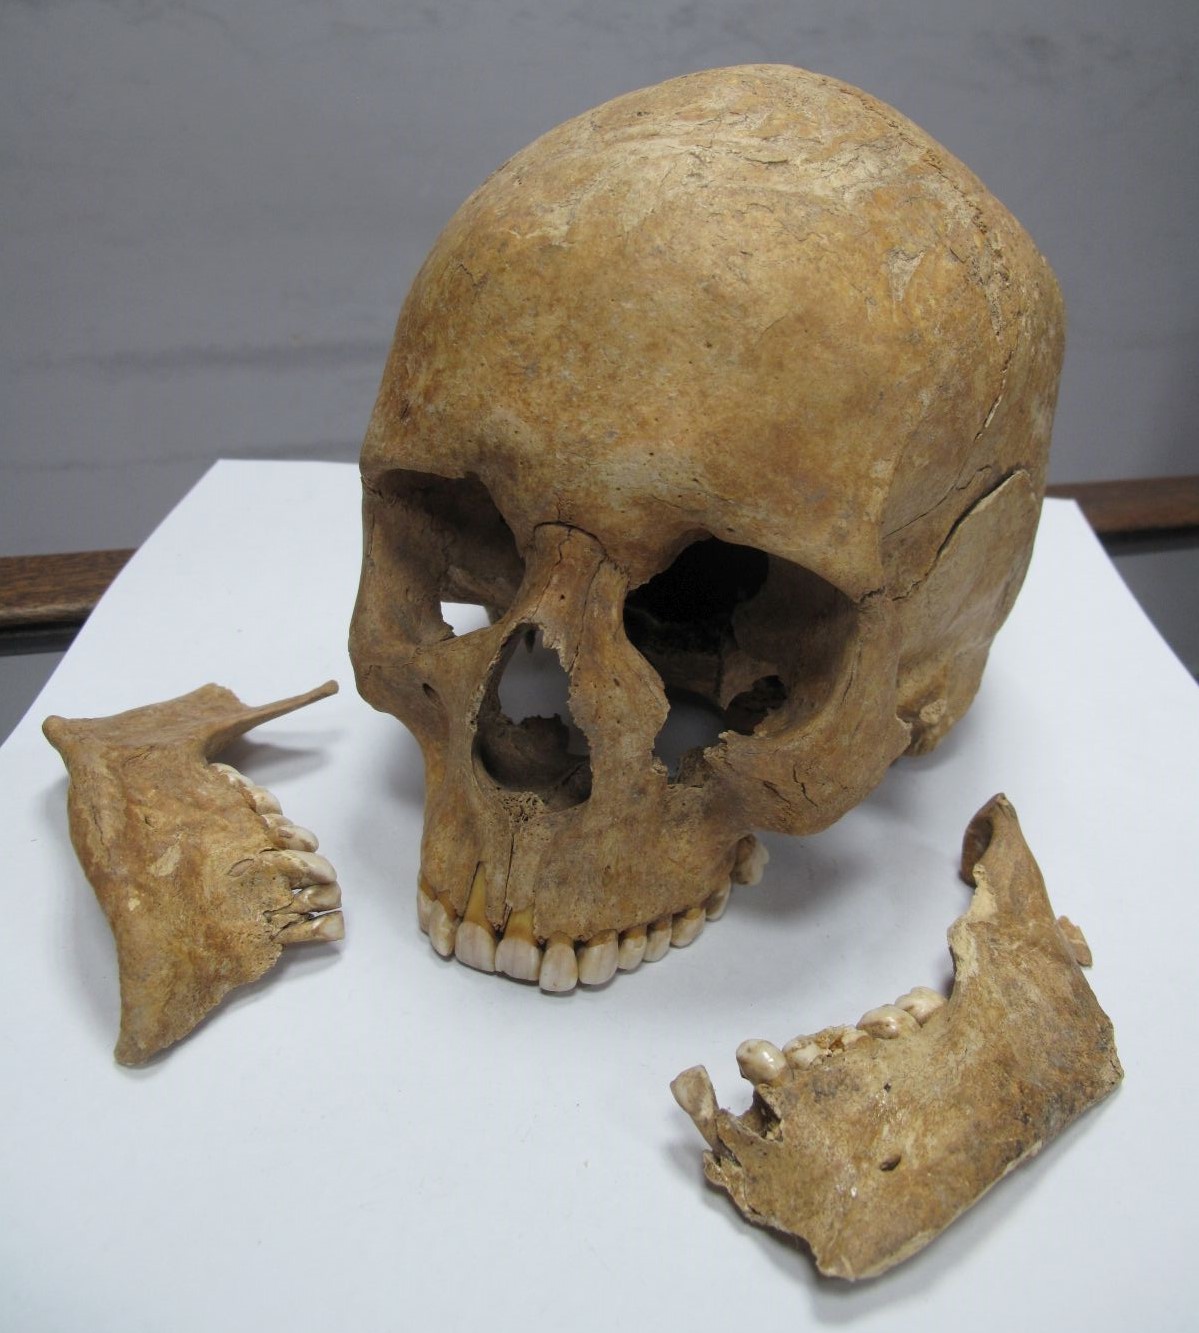 A Skull, with detached mandible.